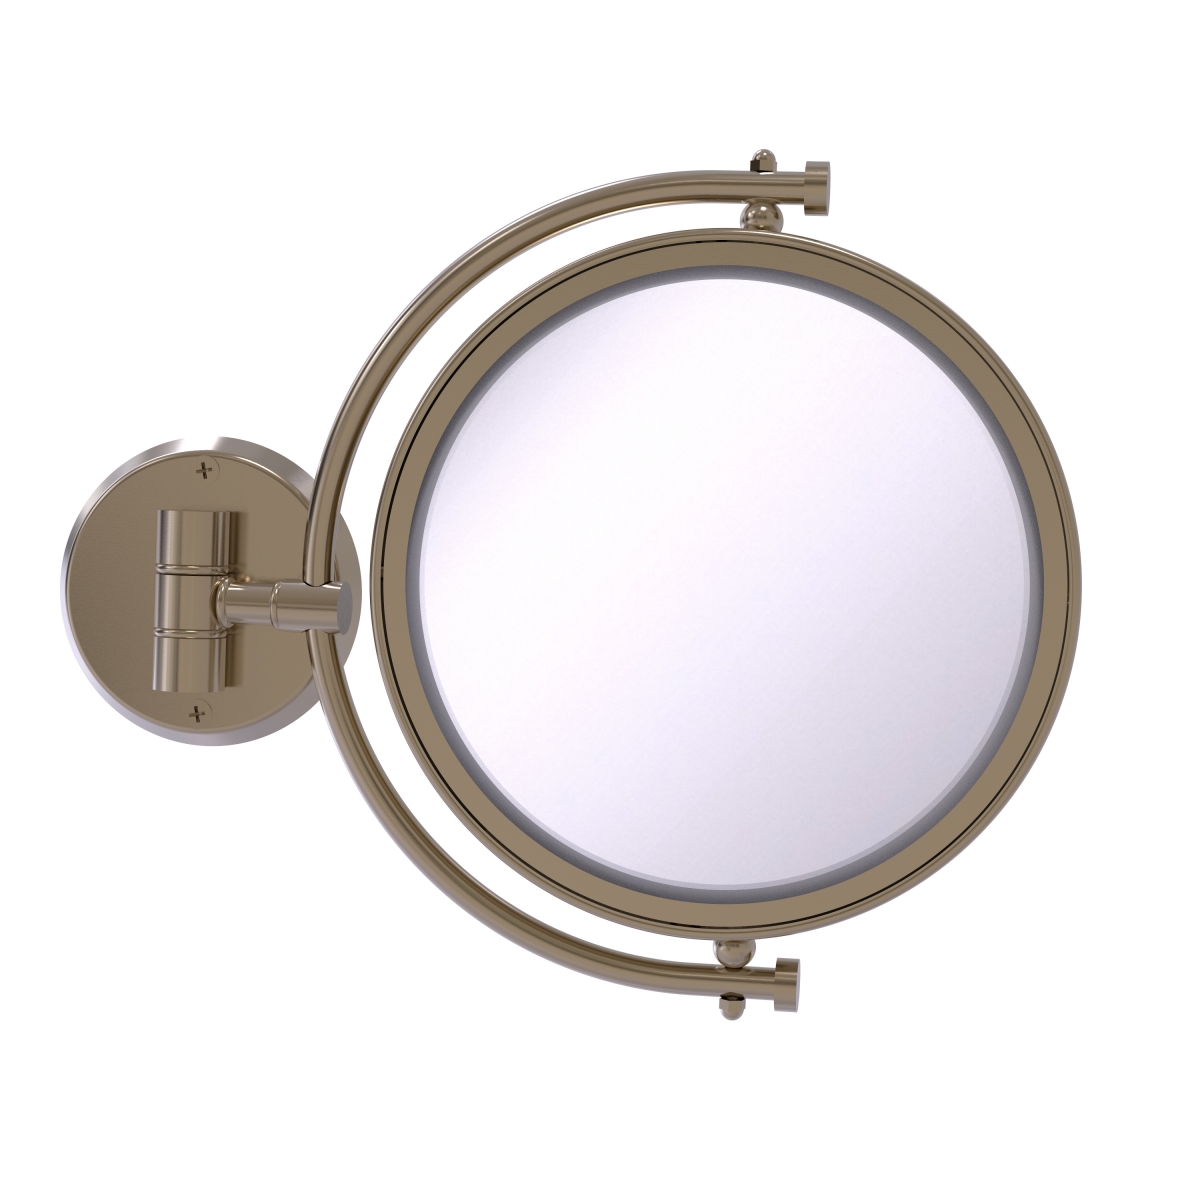 WM-4-3X-PEW 8 in. Wall Mounted Make-Up Mirror 3X Magnification, Antique Pewter - 10 x 8 x 8 in -  Allied Brass, WM-4/3X-PEW